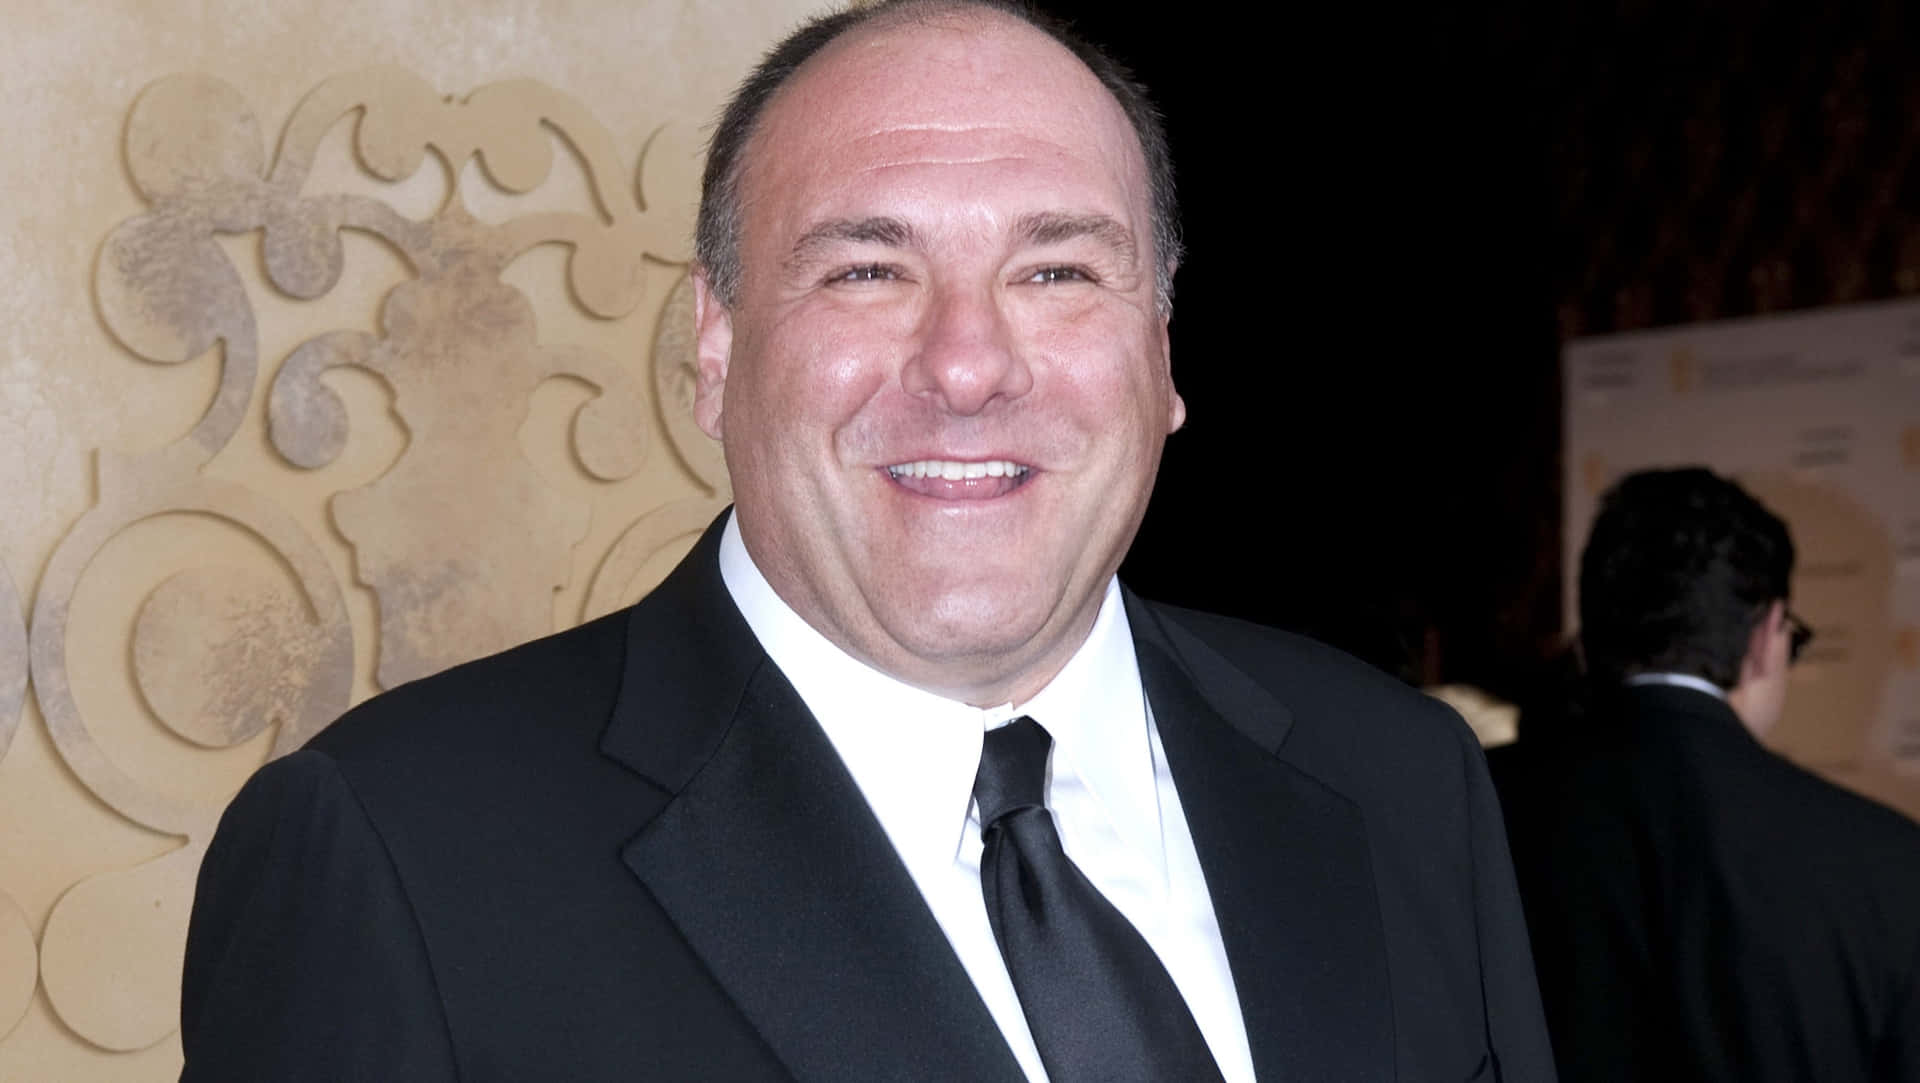 Jamesgandolfini Was An Incredibly Talented Actor Who Became World-famous For His Role As Tony Soprano In The Television Series 